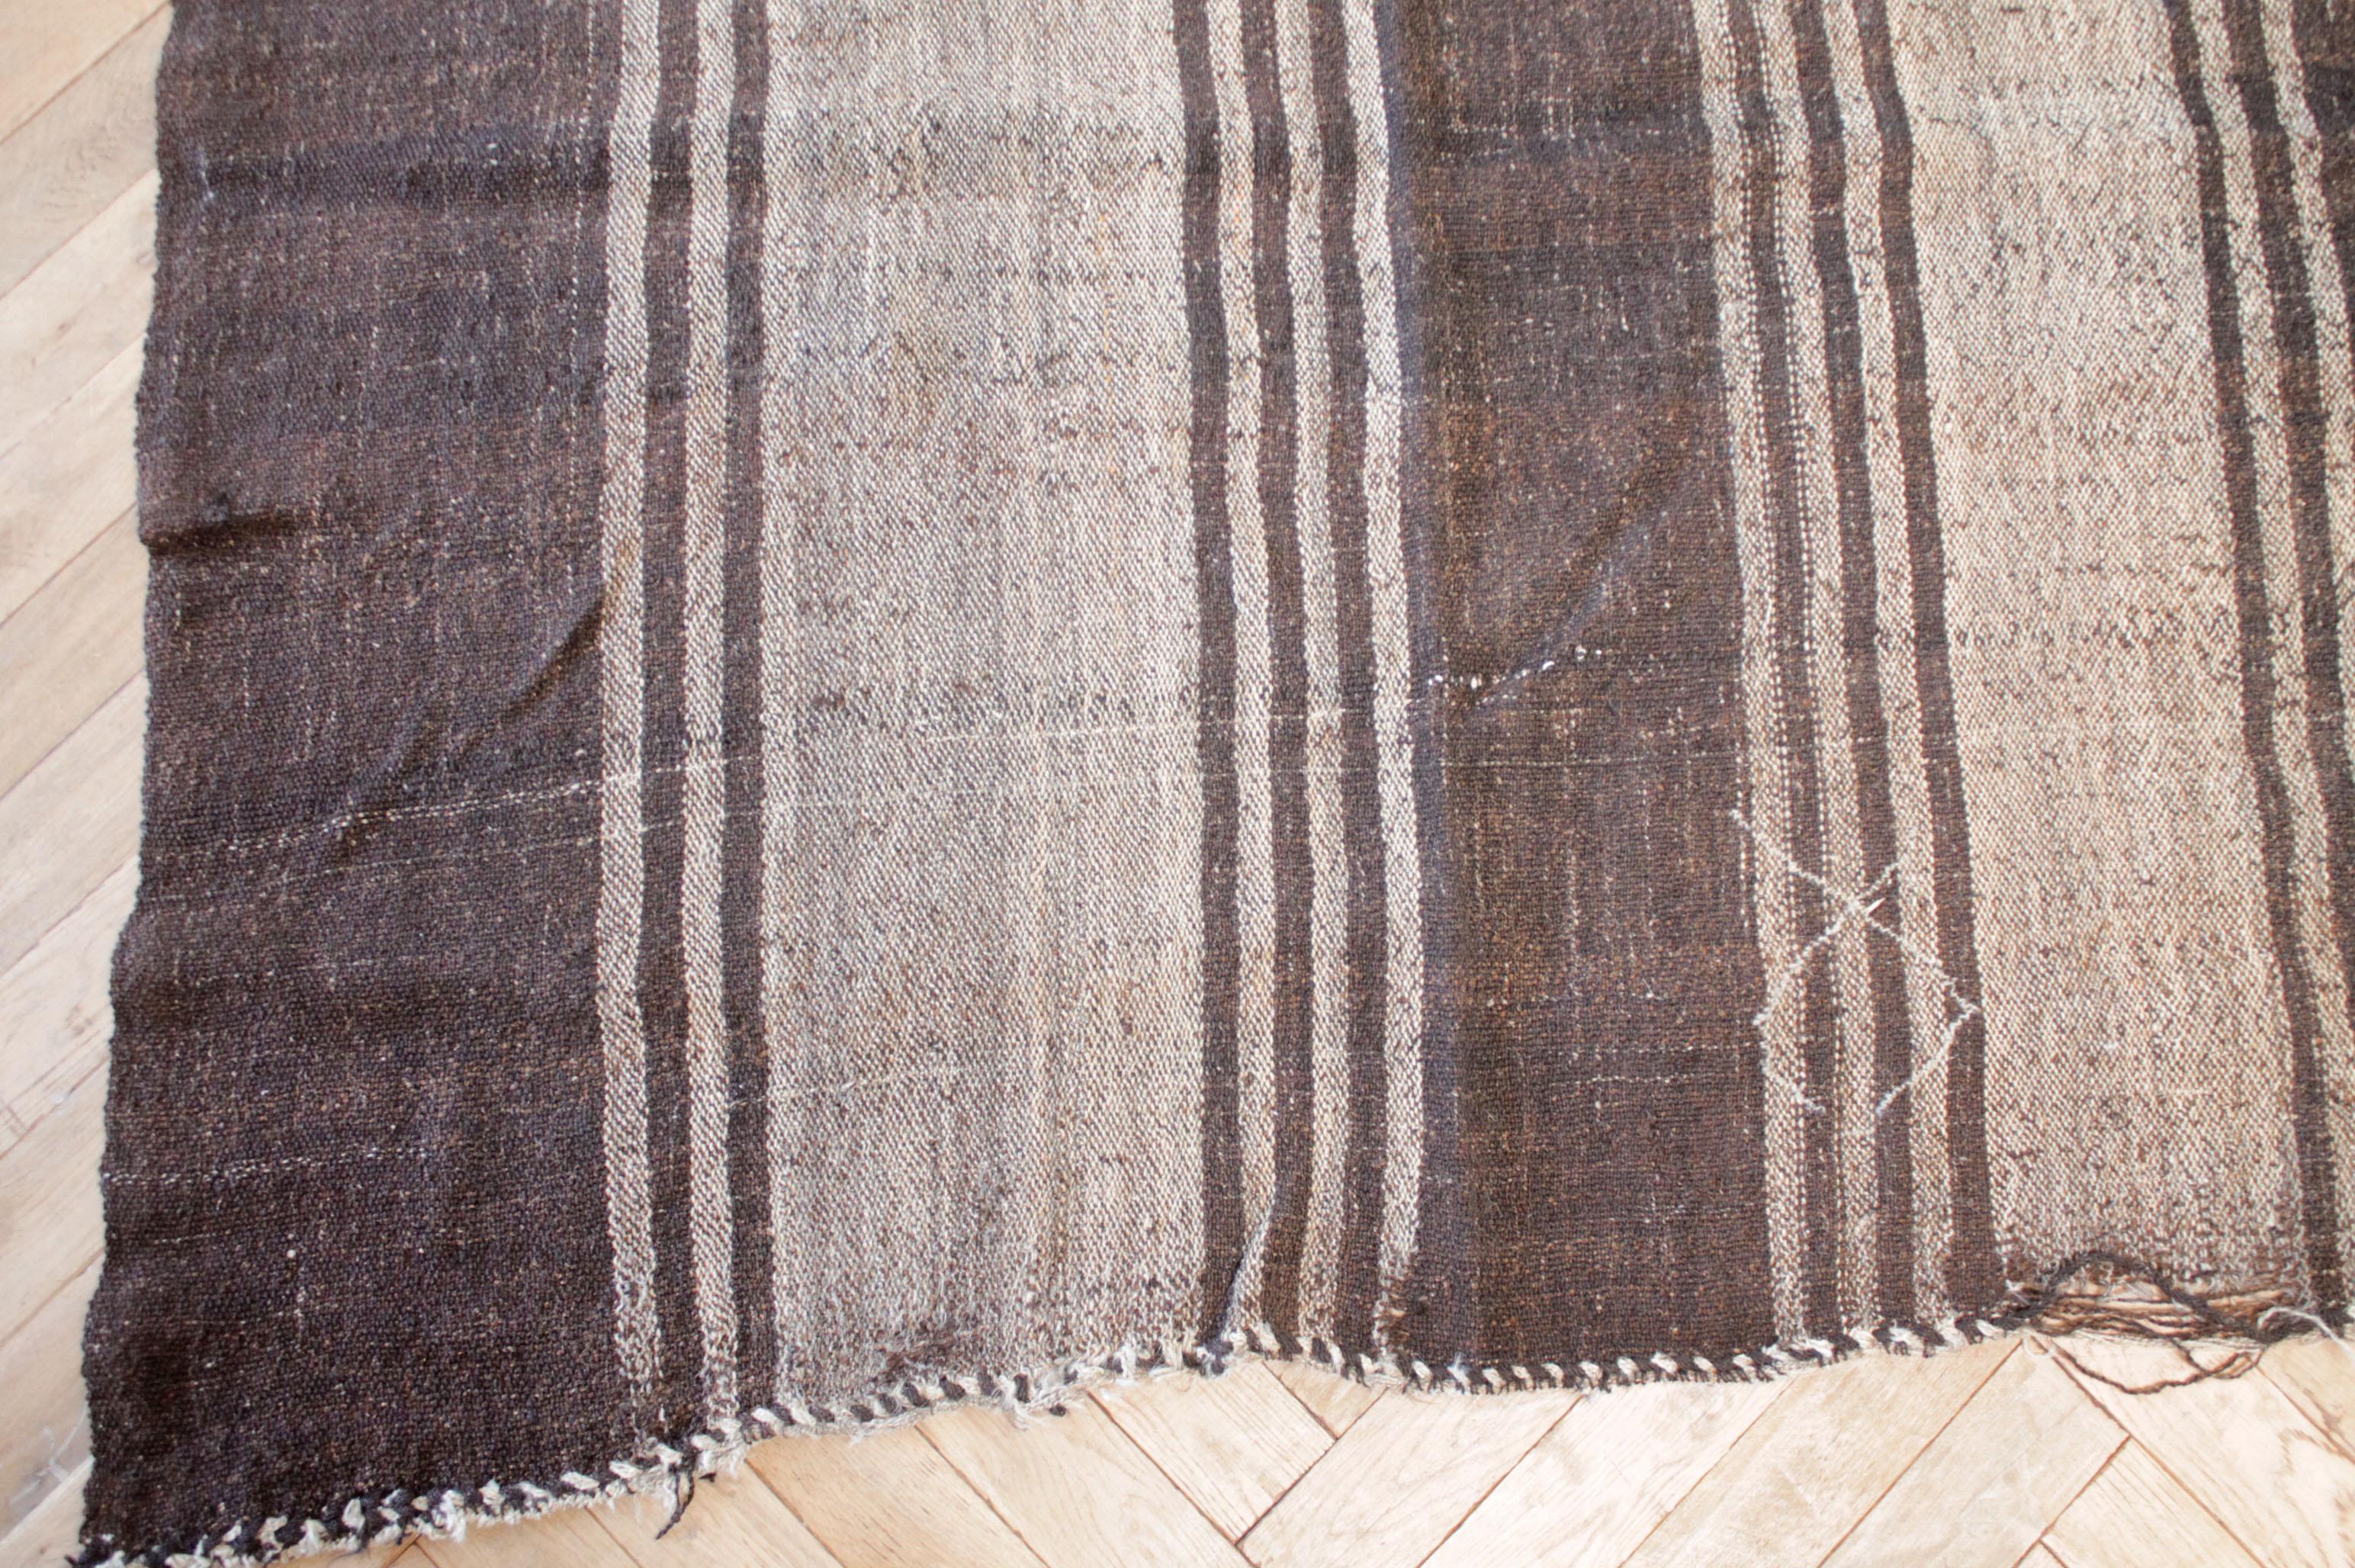 Rodney rug
Vintage Turkish rug in brown with taupe stripes.
Our latest collection has arrived from Turkey, these are great to use as a rug, or let us create a custom ottoman for your out of this piece. If you love this stripe and color combo, let